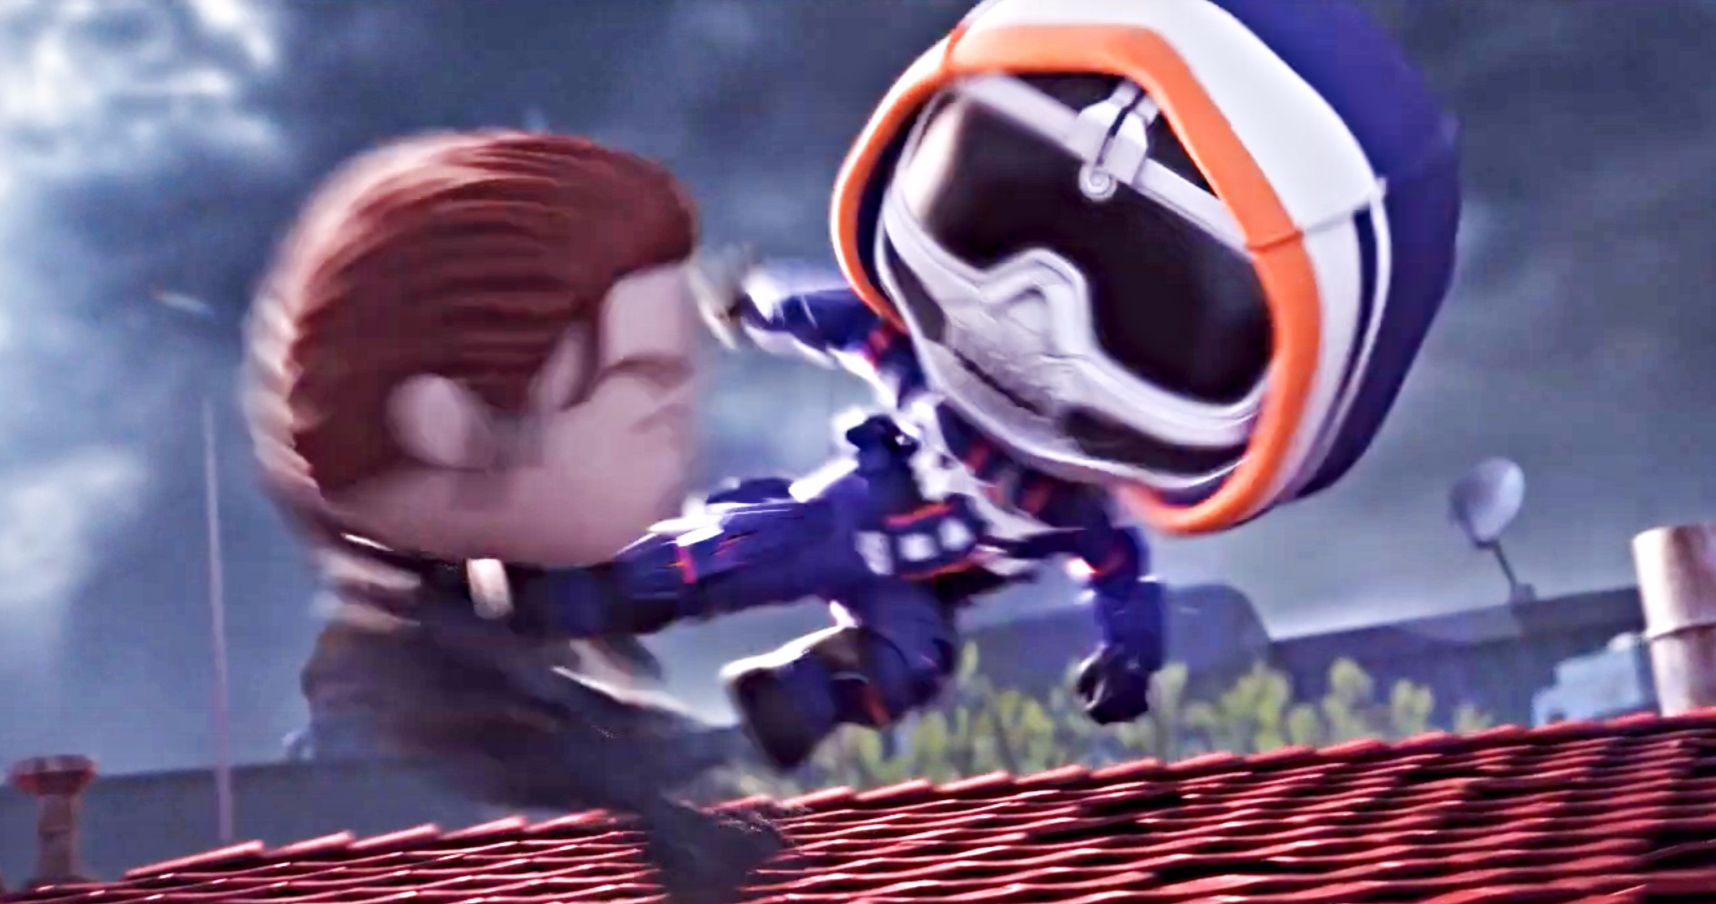 Black Widow Funko Animated Short Teases the Taskmaster Fight We're Missing This Weekend